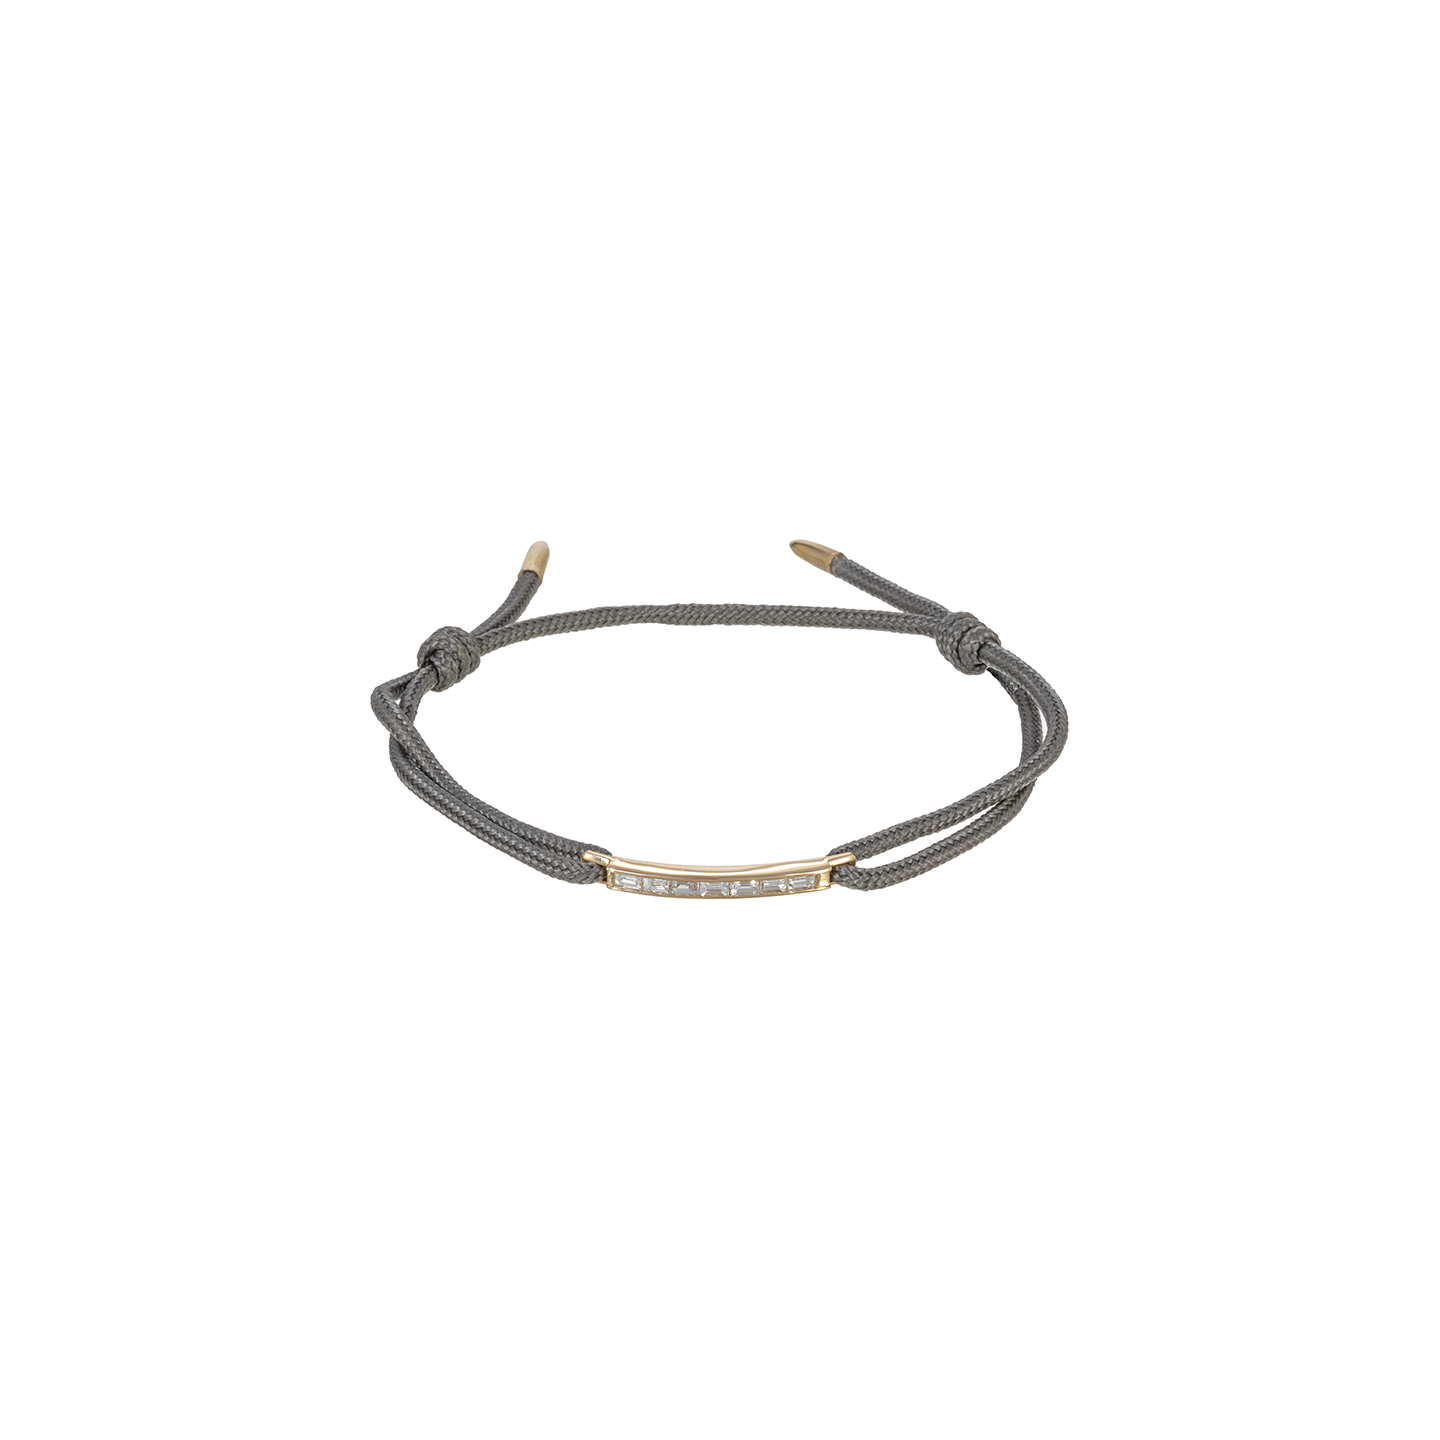 Luis Morais Medium Link ID Bar with Diamond Baguettes and Bullet Tip Ends on Cord Bracelet